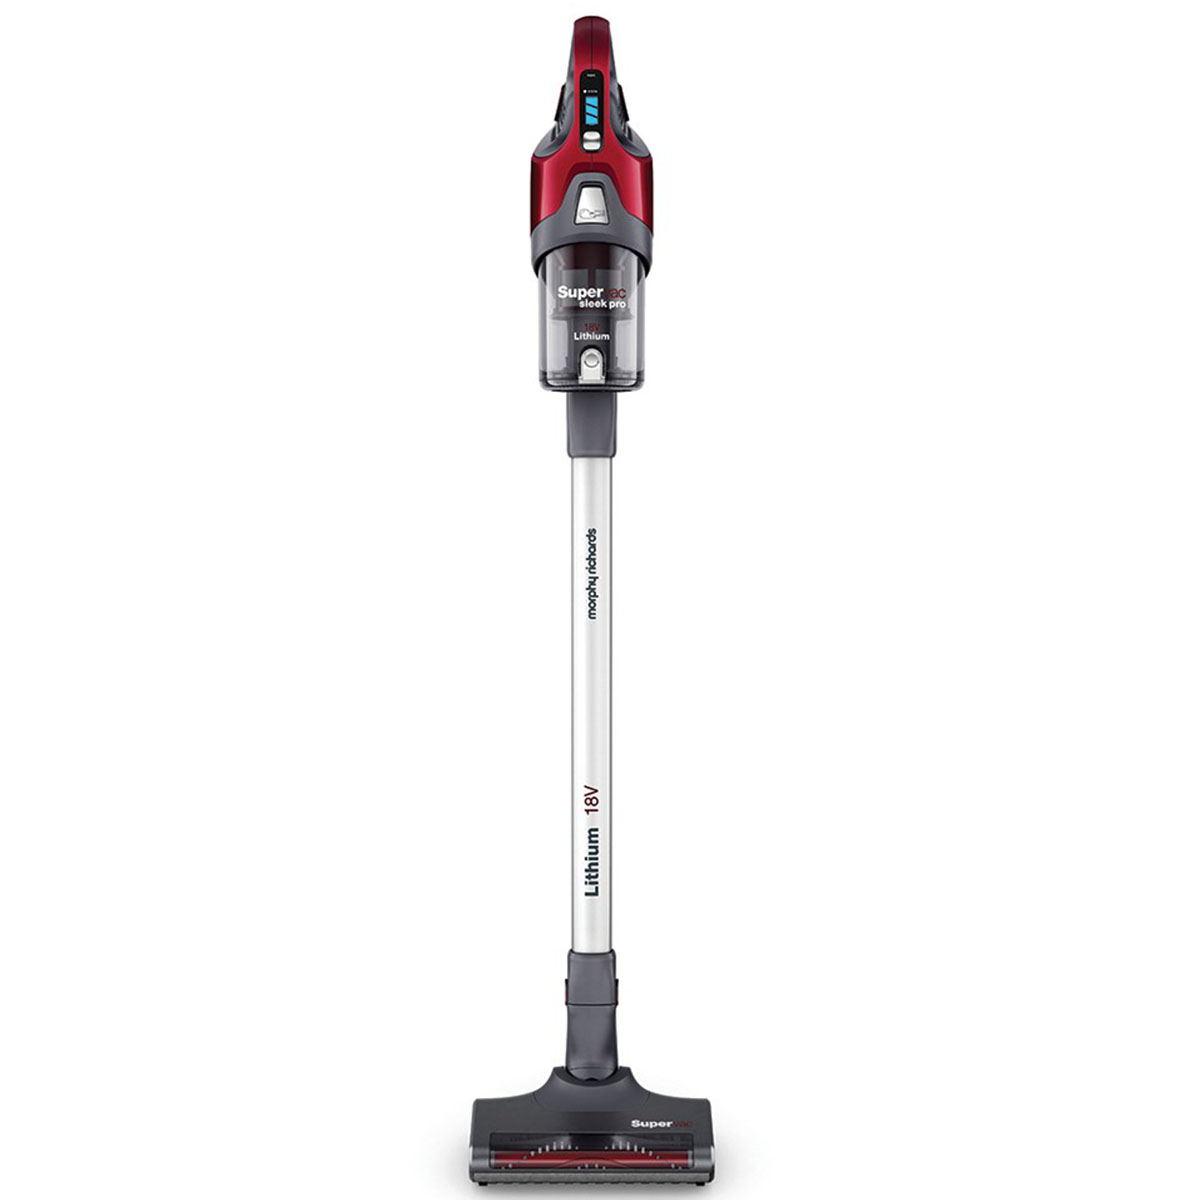 Morphy Richards 734055 Supervac Deluxe Vacuum Cleaner - Red / Grey